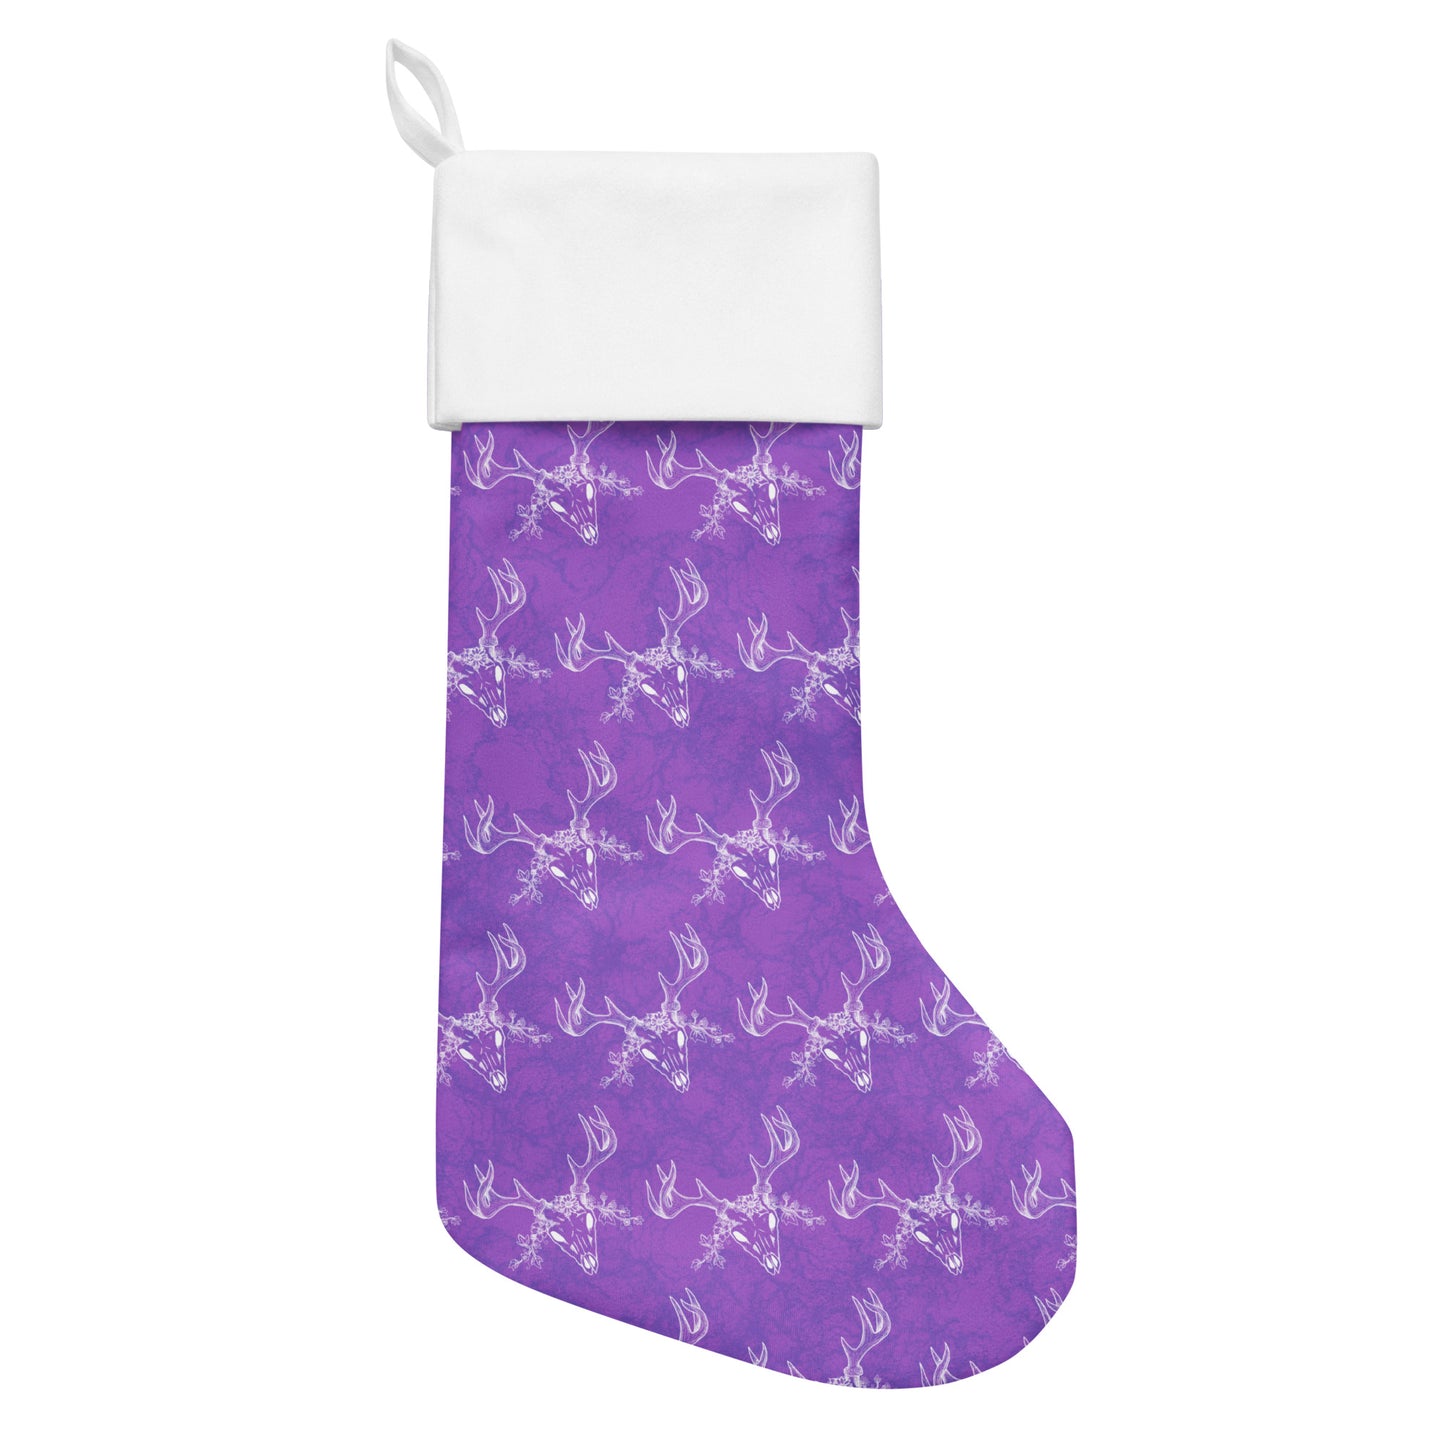 Limited Edition Purple Deer Skull Christmas Stocking.  7 by 18 inches. The front has a hand-illustrated deer skull design on a purple background with an off-white polyester fabric on the back. It has a white fold-over cuff and a loop for hanging. Flat lay view.